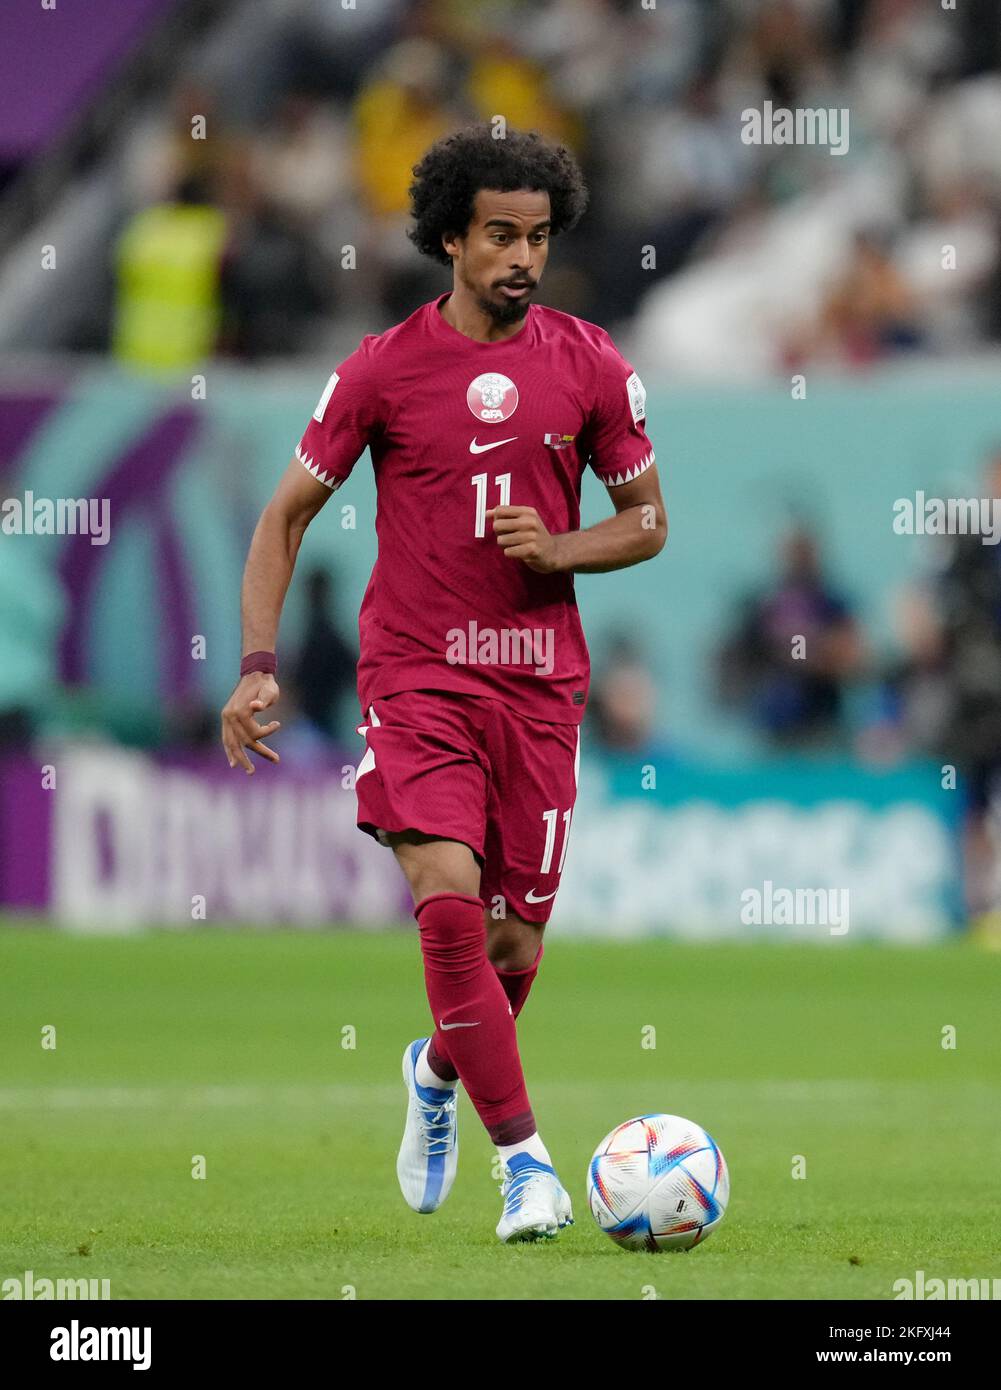 Qatar's Akram Afif during the FIFA World Cup Group A match at the Al Bayt Stadium in Al Khor, Qatar. Picture date: Sunday November 20, 2022. Stock Photo